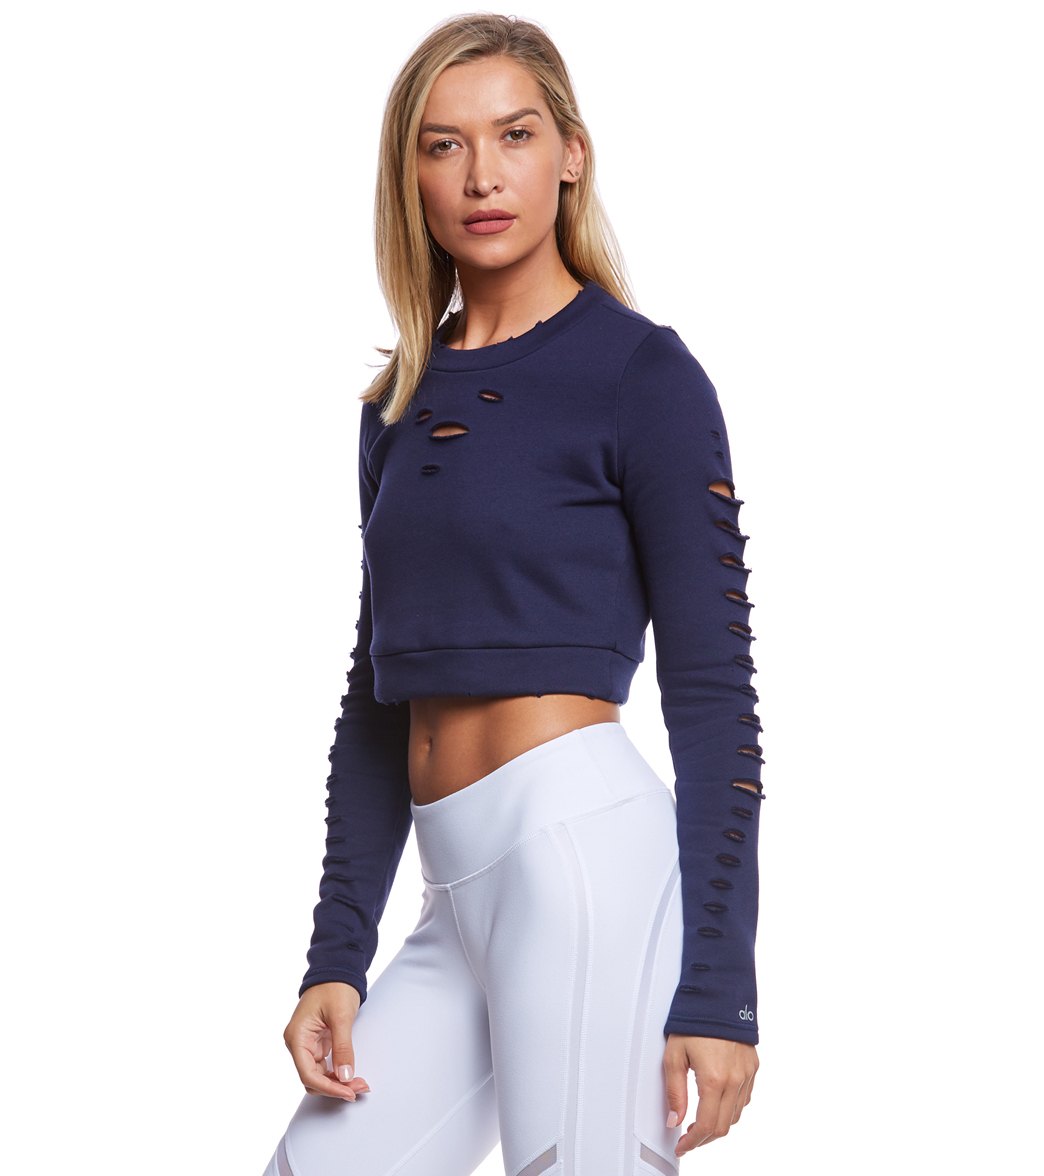 Alo Yoga Ripped Warrior Yoga Long Sleeve Top at YogaOutlet.com